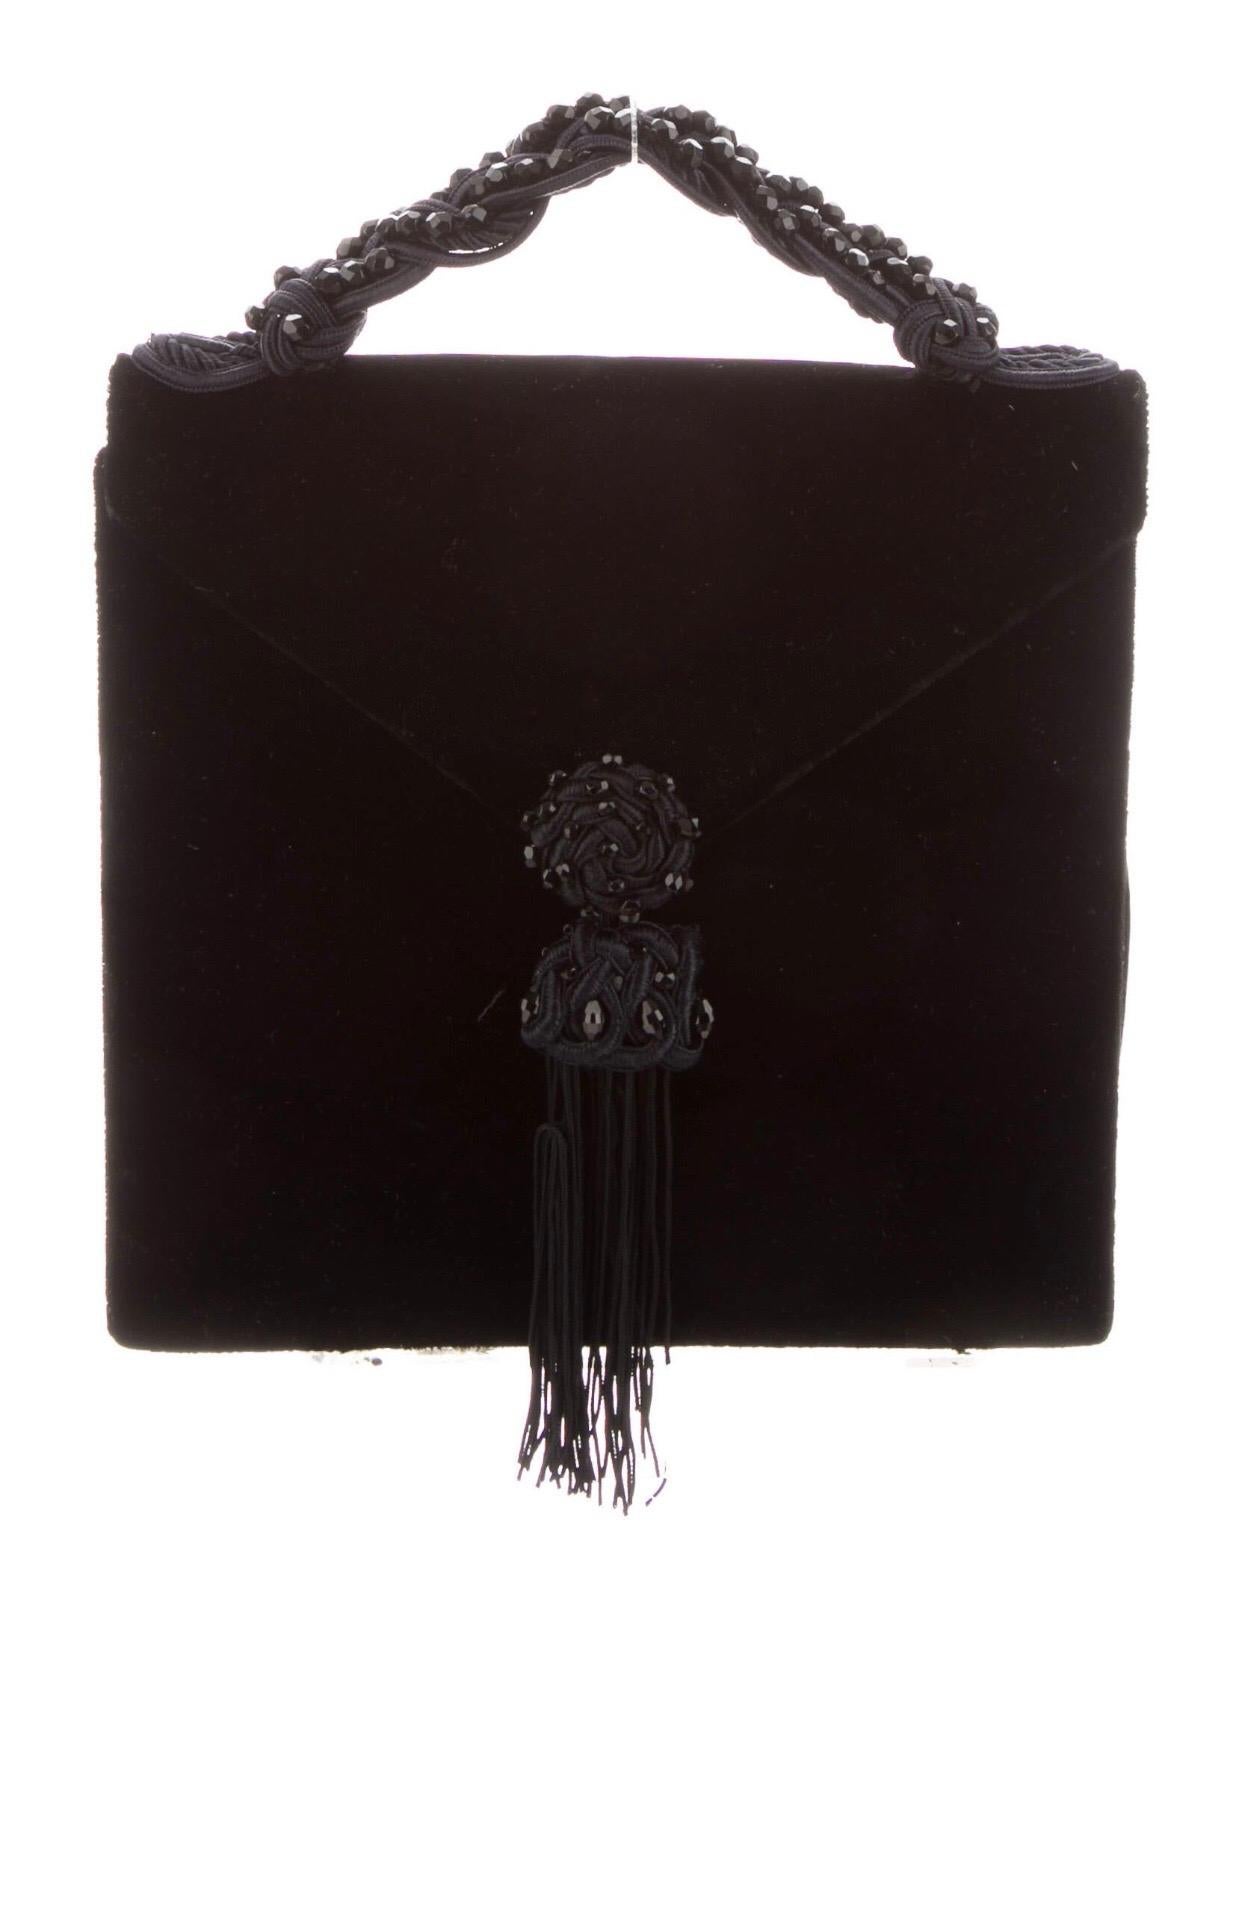 1980s Yves Saint Laurent black velvet bag with tassel and top handle. 
Condition: Excellent
Snap closure at front. Singe interior pocket. 
7.5